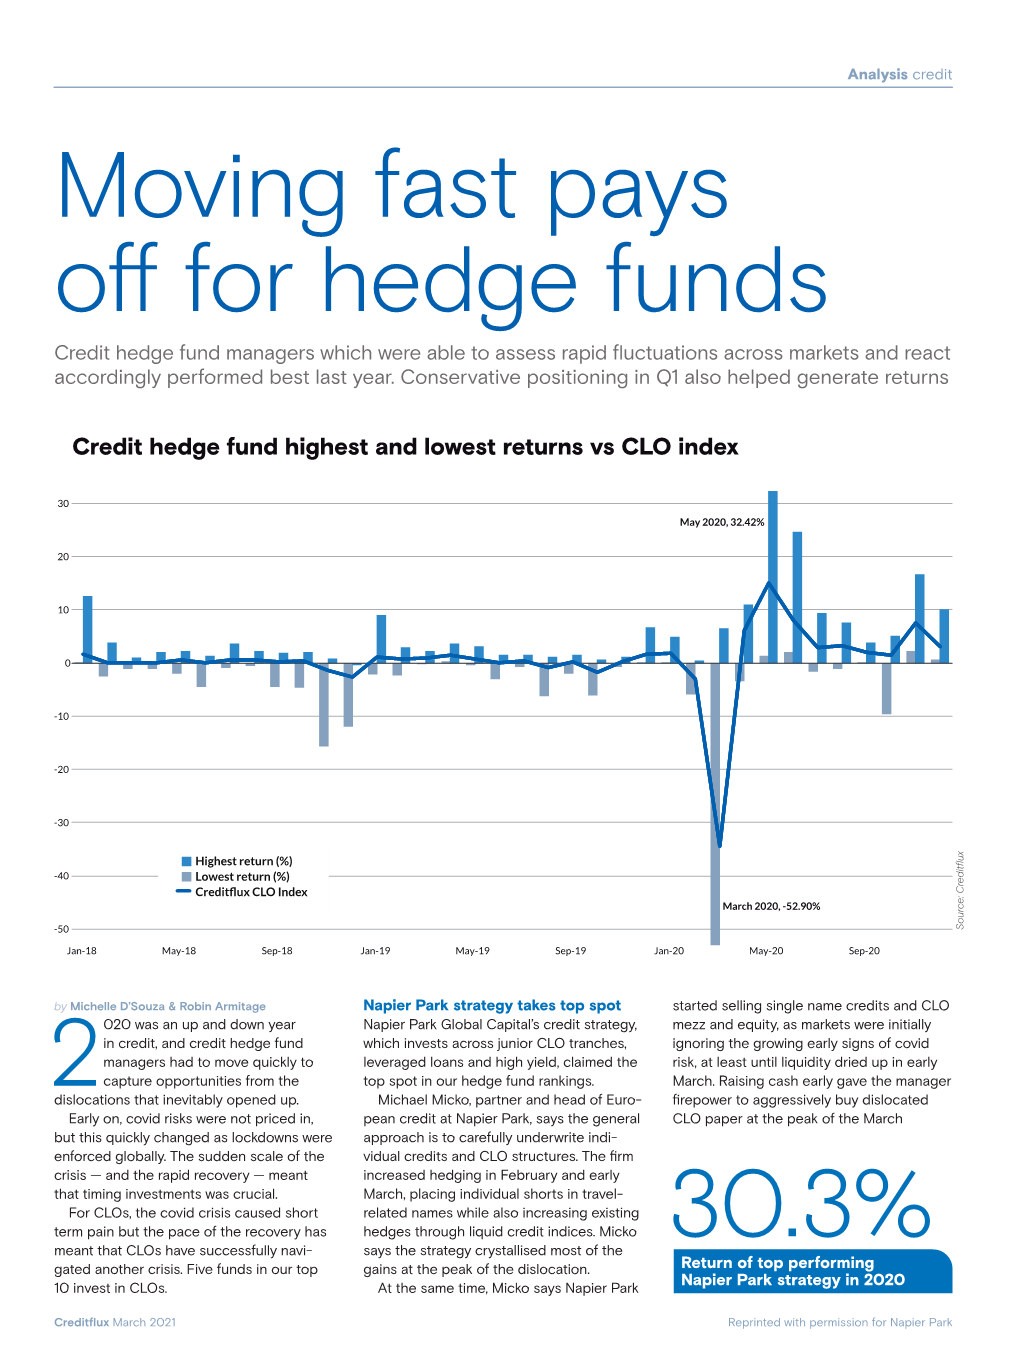 Moving Fast Pays Off for Hedge Funds